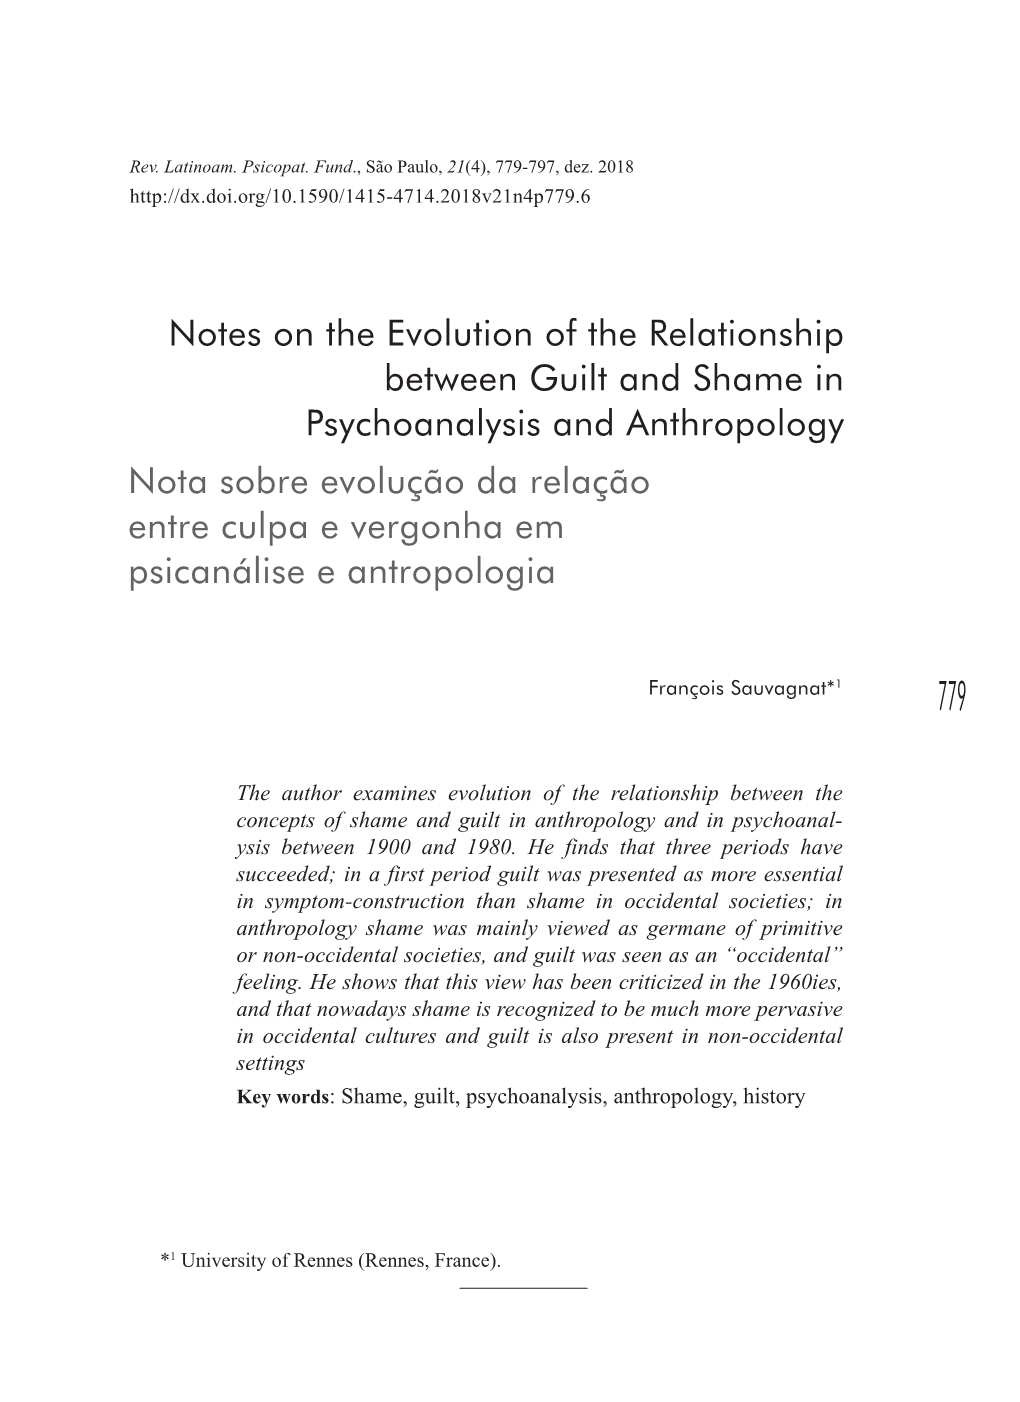 Notes on the Evolution of the Relationship Between Guilt And